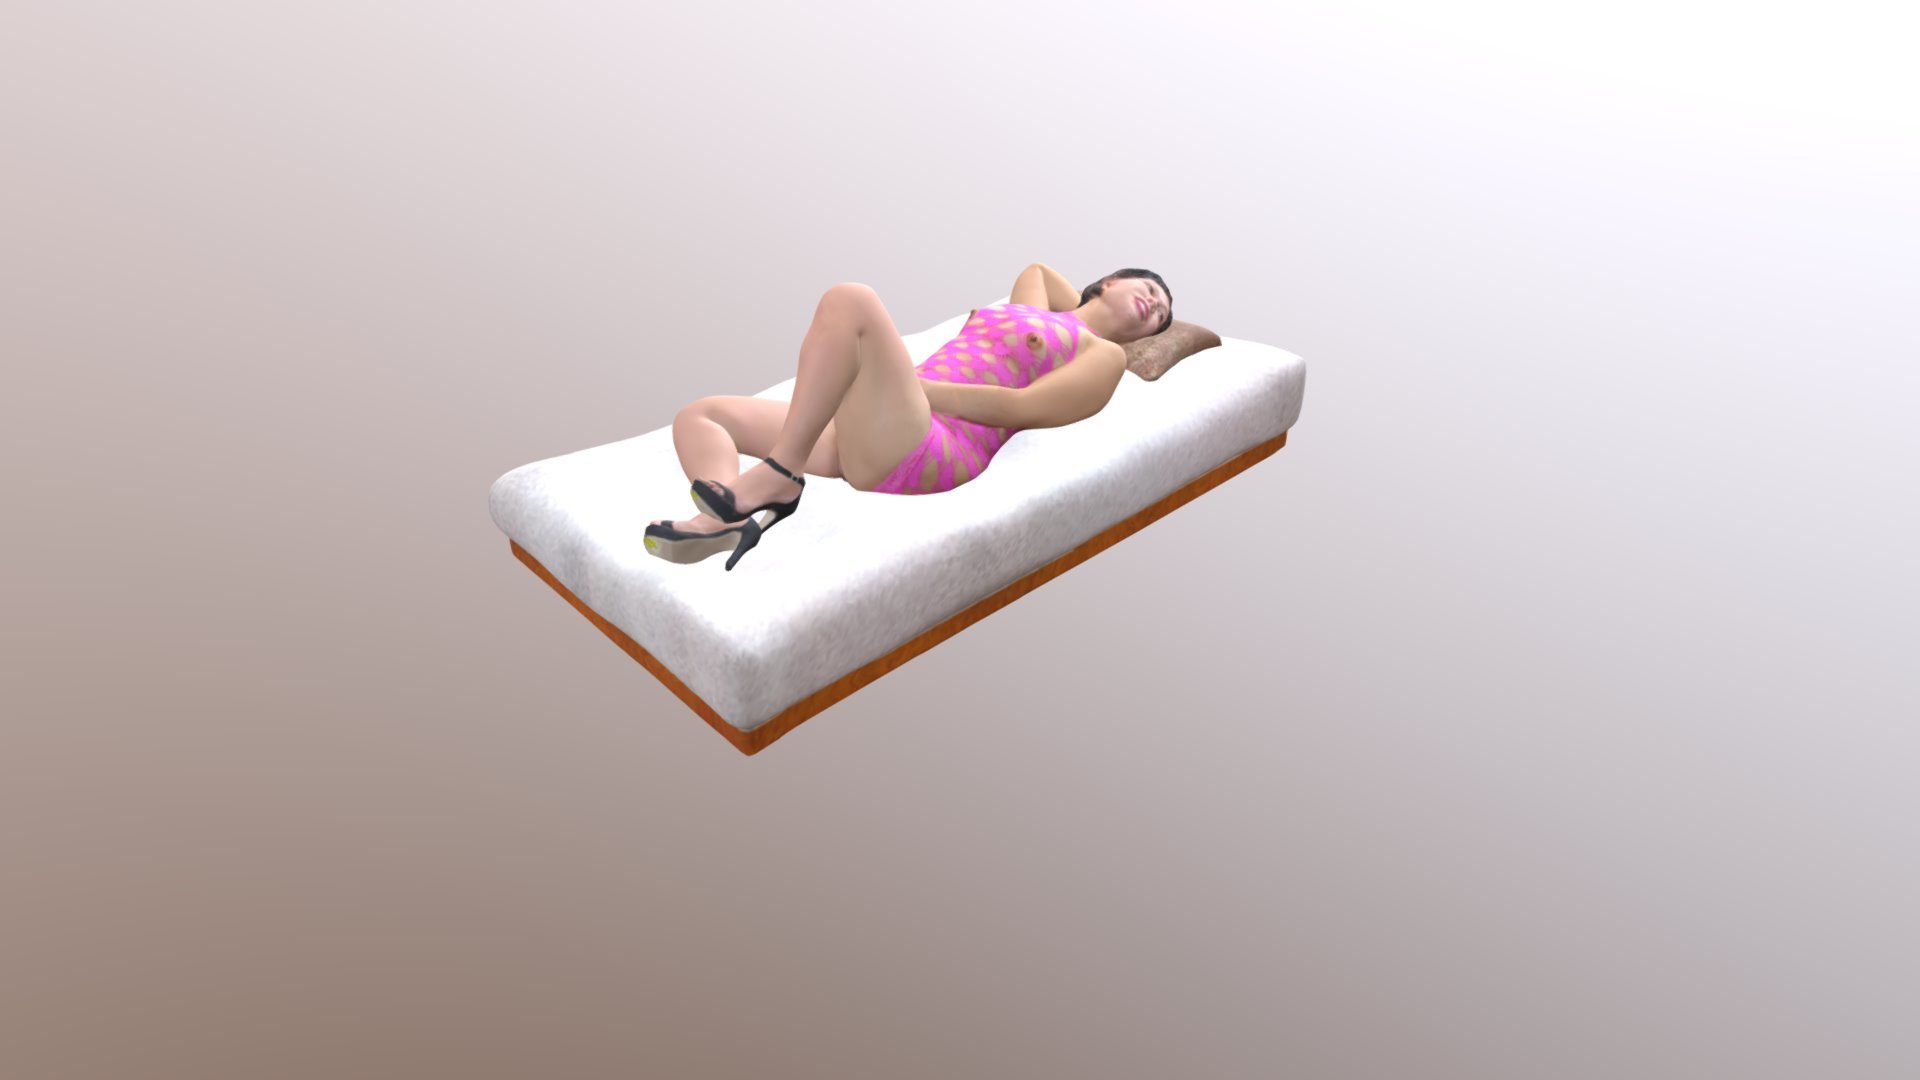 Angie in Pink - 3D model by Angie (@angiefilipina) 3d model